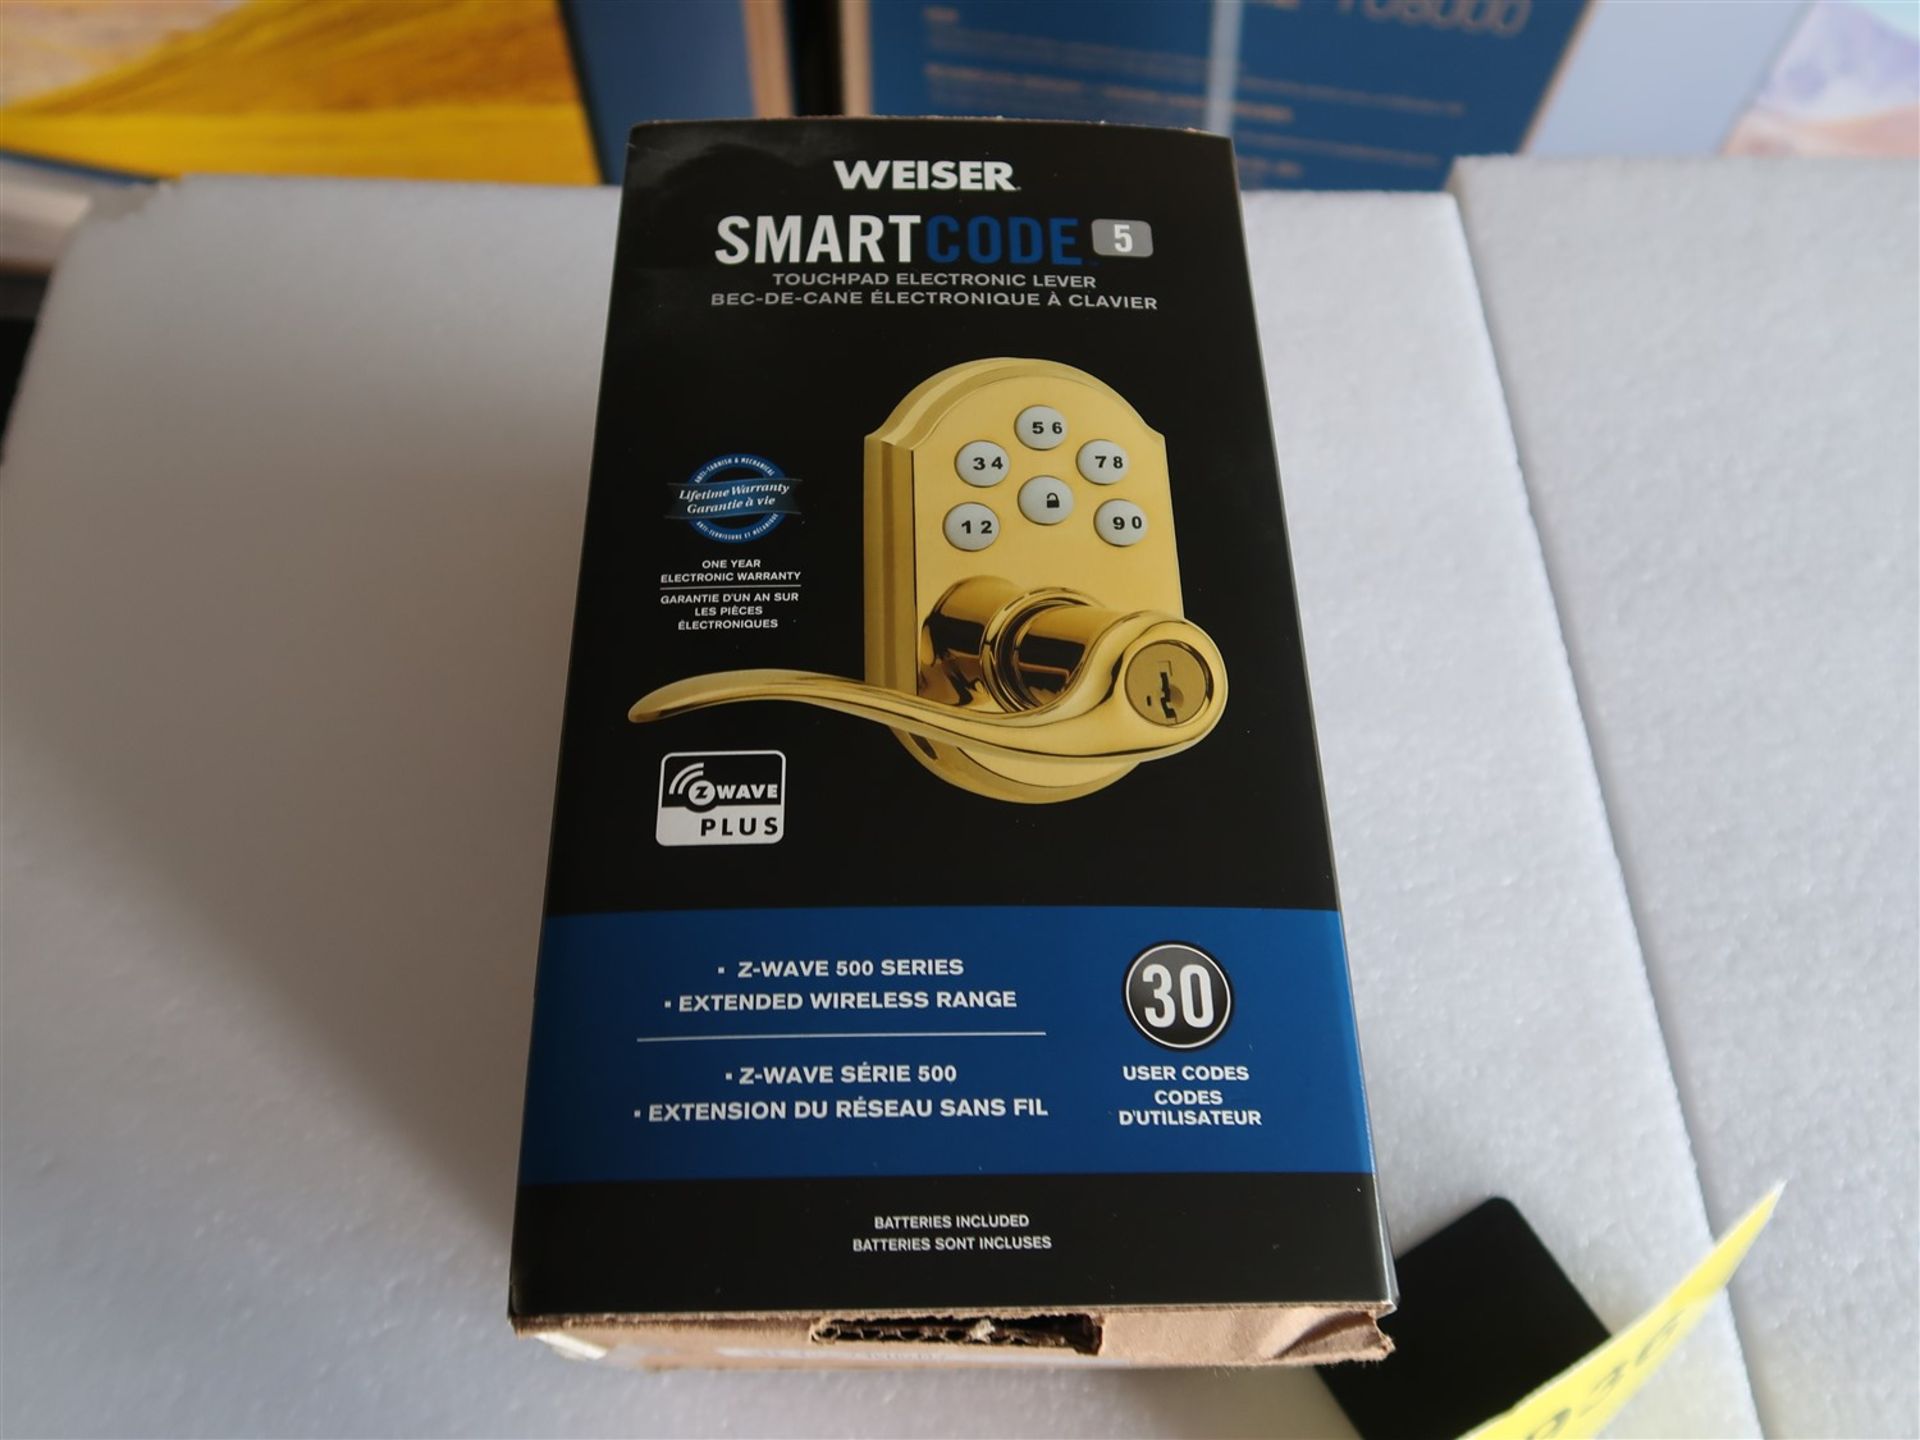 WEISER SMART CODE 5 TOUCH PAD ELECTRONIC LEVER 9GED 14550-004 BRASS, (BNIB) - Image 2 of 3